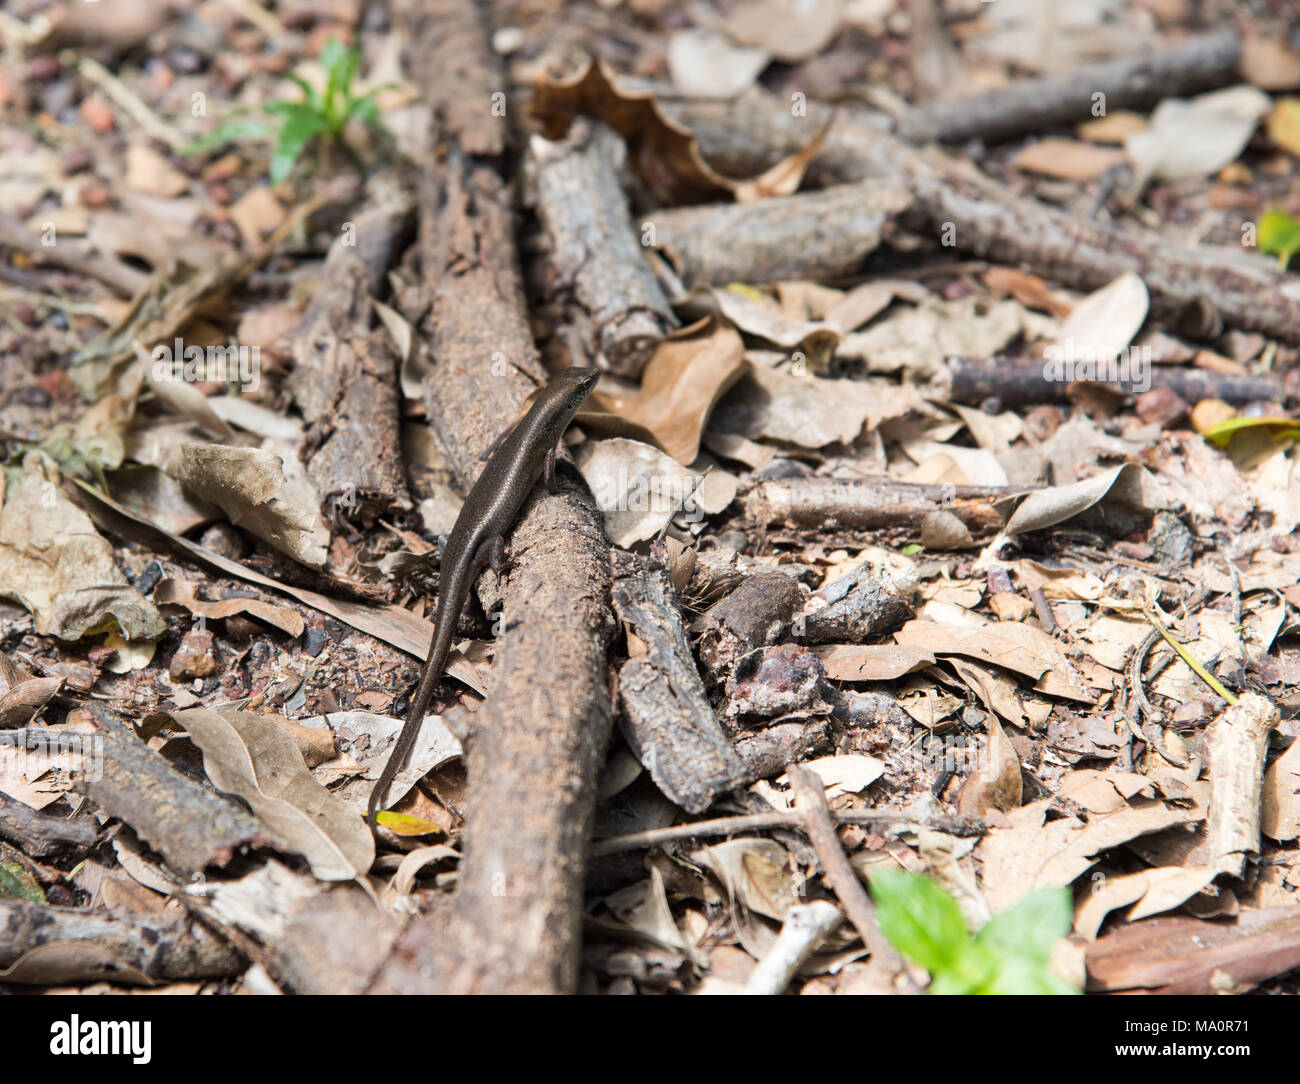 One shiny skink lizard on rainforest ground with dried leaves and branch in Darwin, Australia Stock Photo